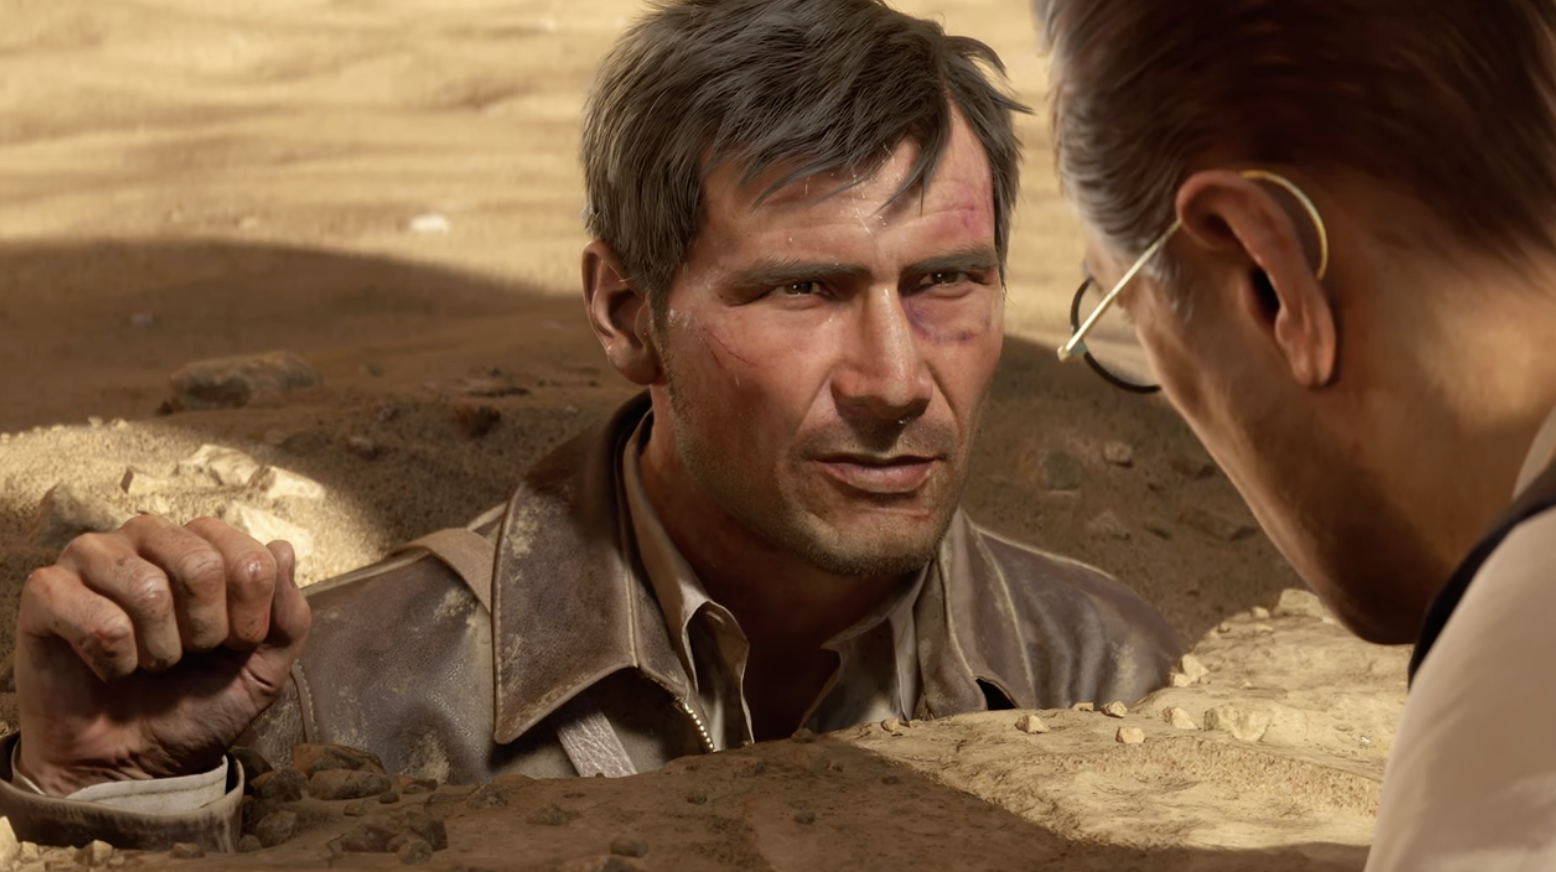 Indiana Jones in video game Indiana Jones and the Great Circle:" a white man with brown hair buried up to his shoulders in sand